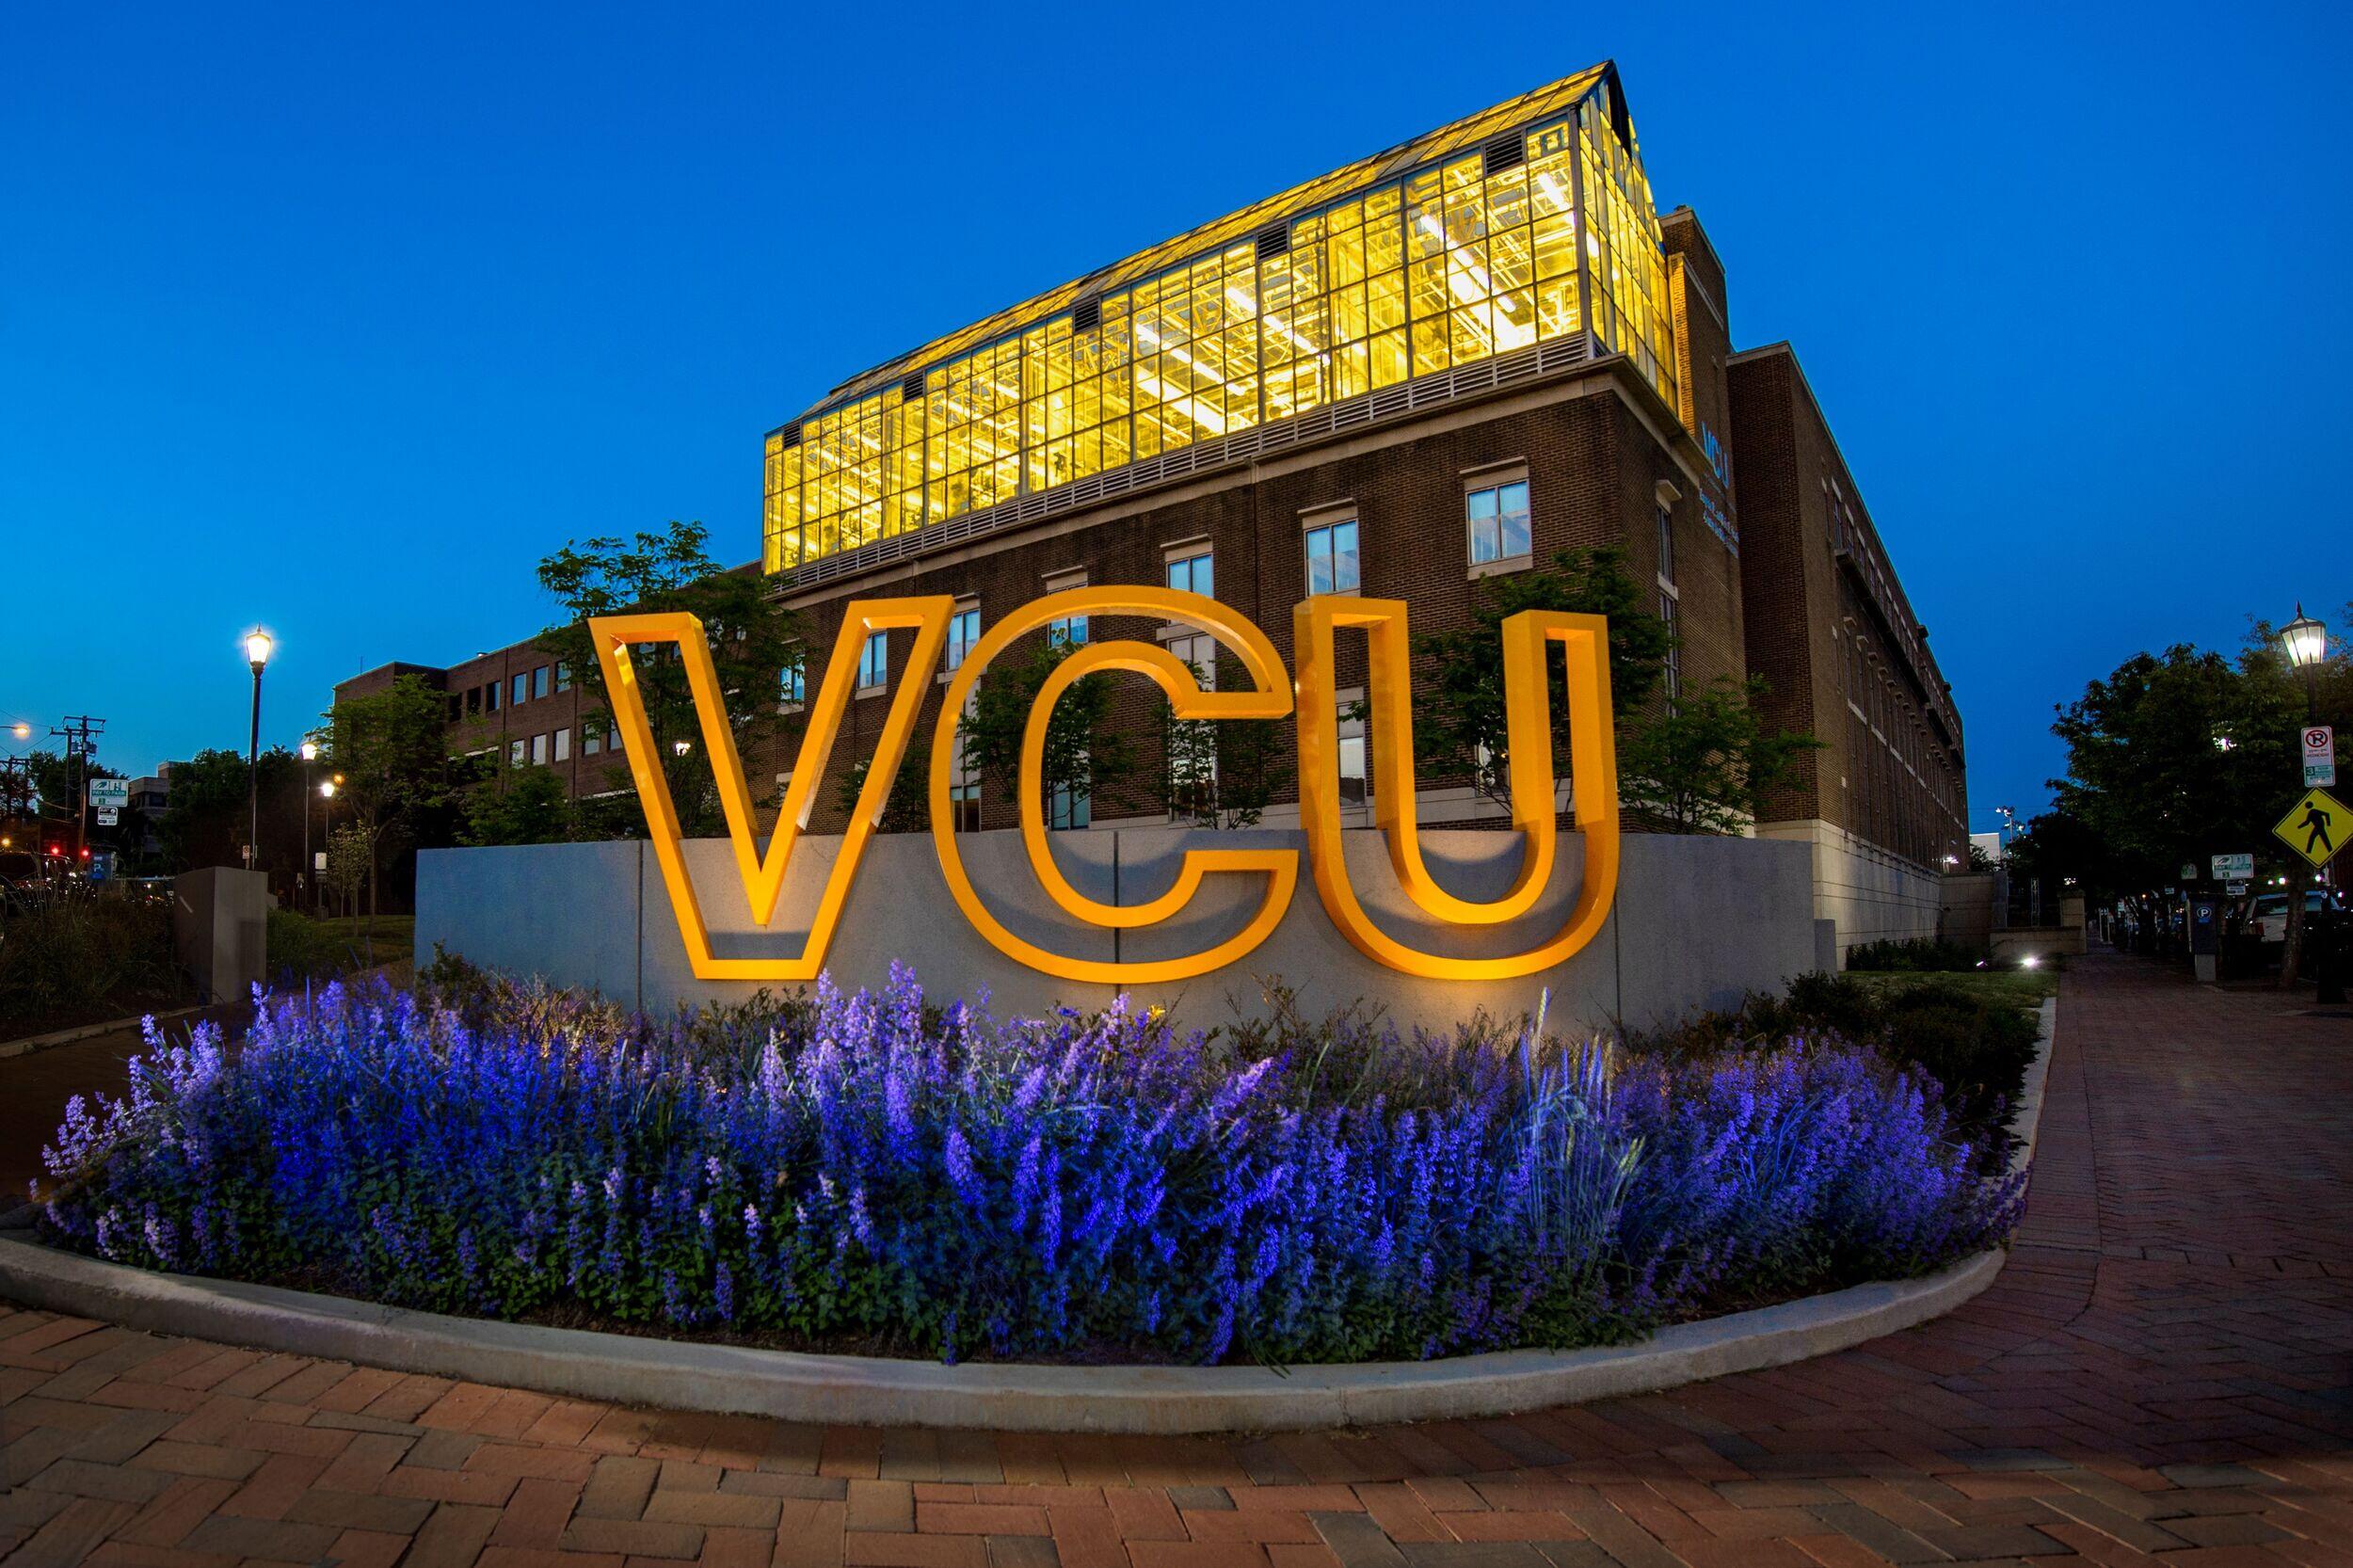 Image of lit up yellow VCU sign at night.